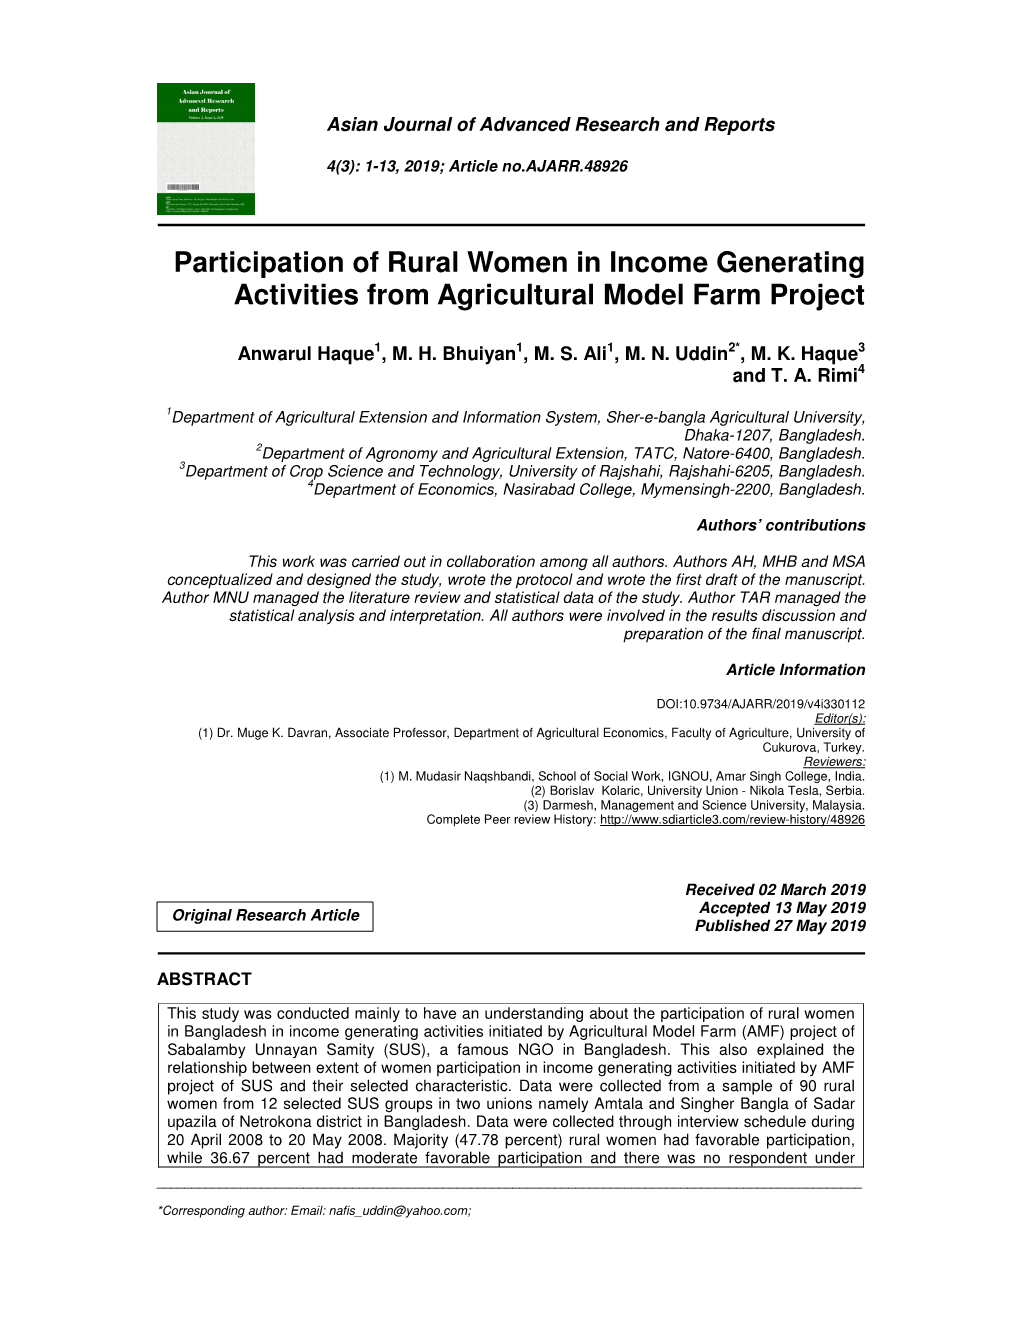 Participation of Rural Women in Income Generating Activities from Agricultural Model Farm Project